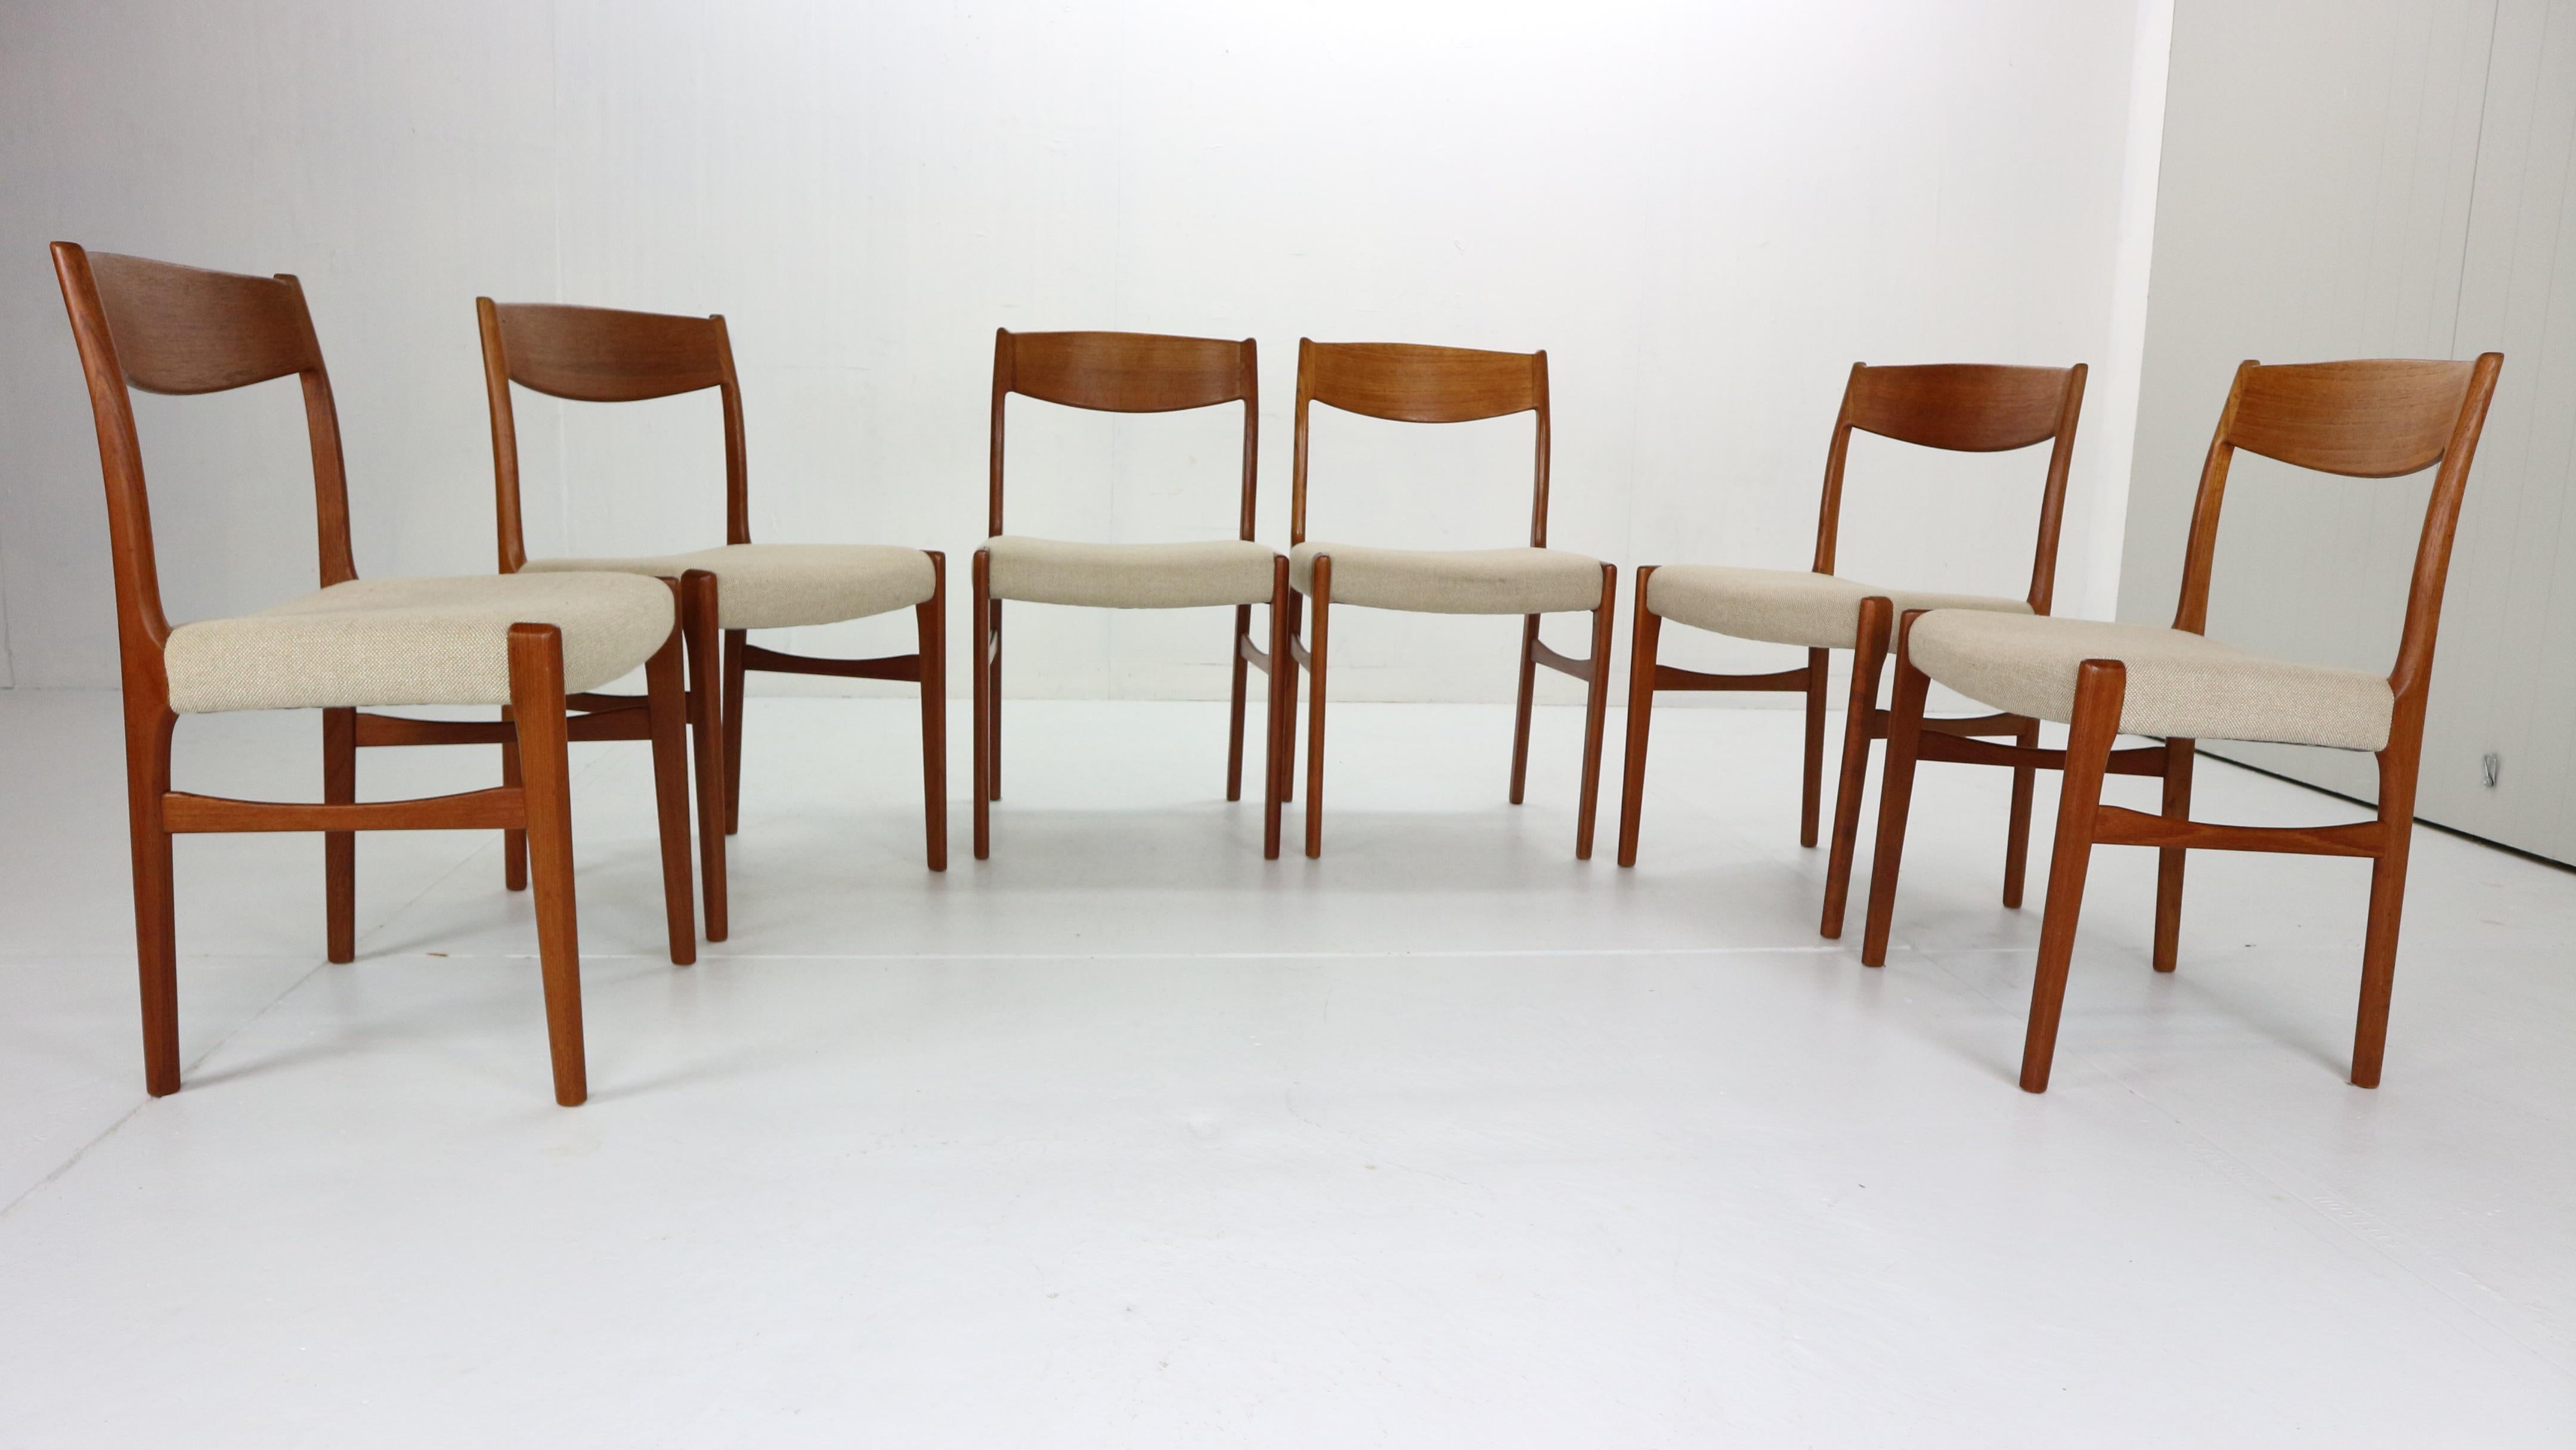 Scandinavian Modern period set of 6 dining room chairs designed and manufactured by G. S. Glyngore Stolefabrik in 1960s, Denmark.
Frame is made of curved solid teak wood, light beige seating in hopsak wool fabric.
Comfortable seating.
 
 